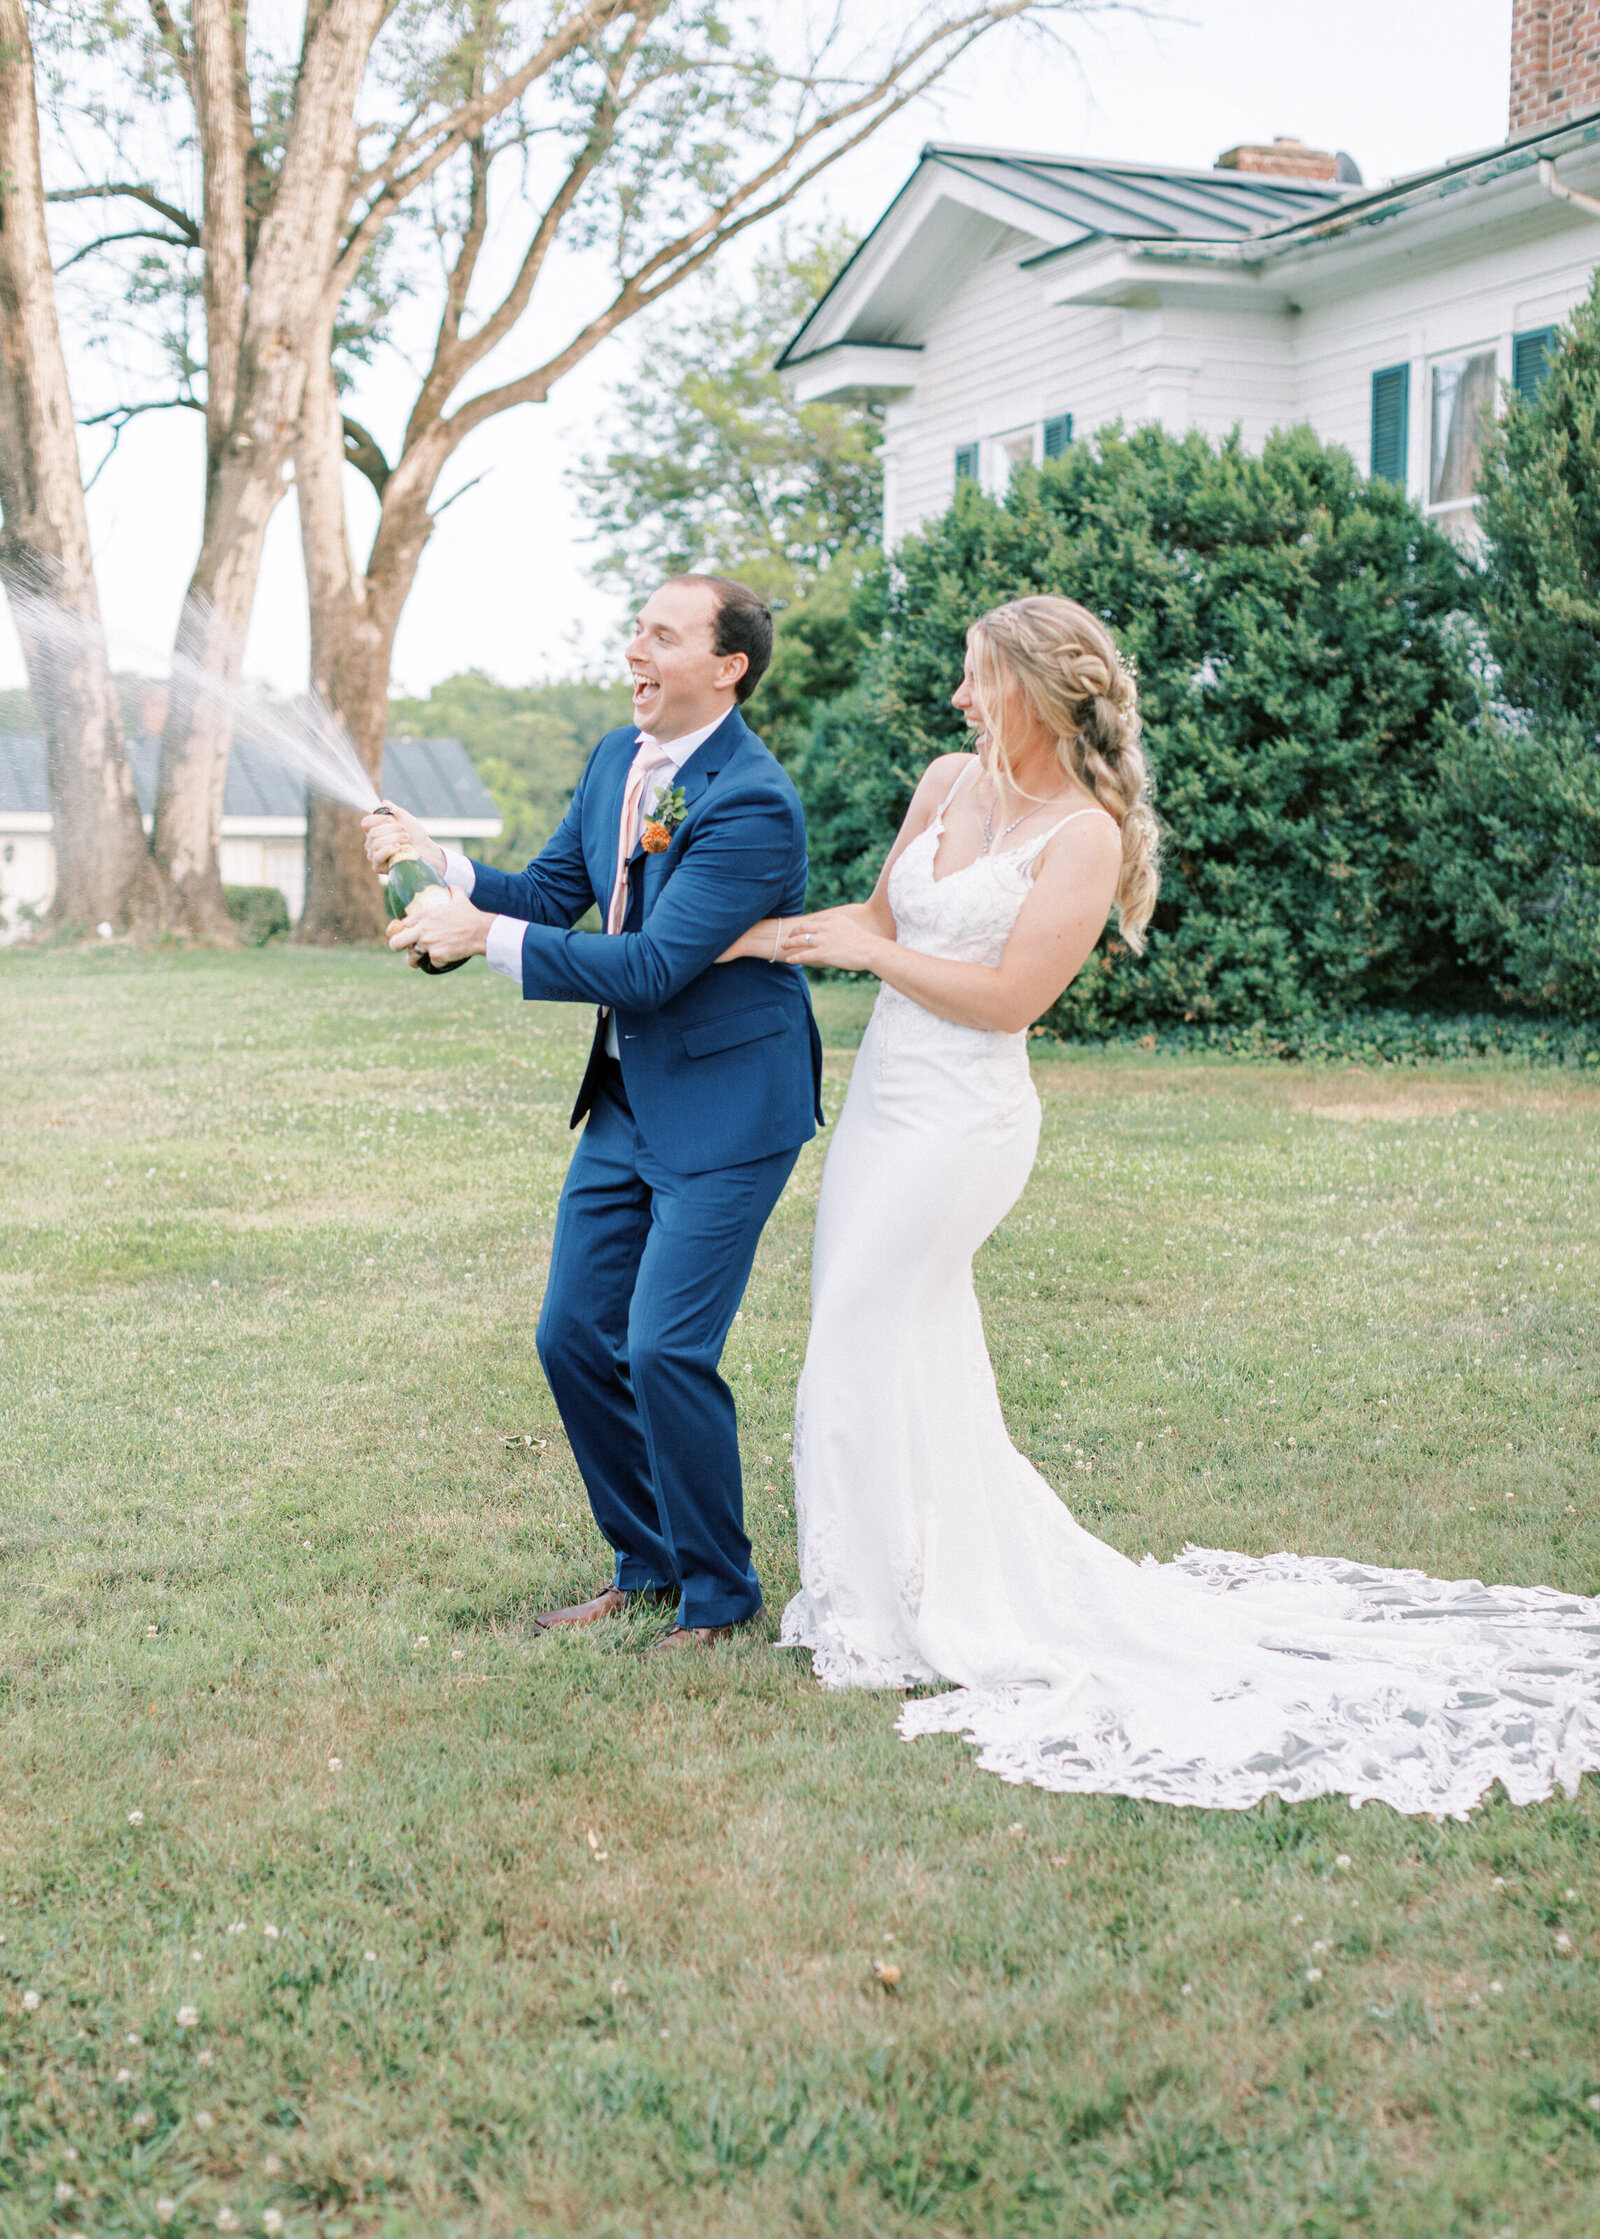 Bride and groom pop a champagne bottle